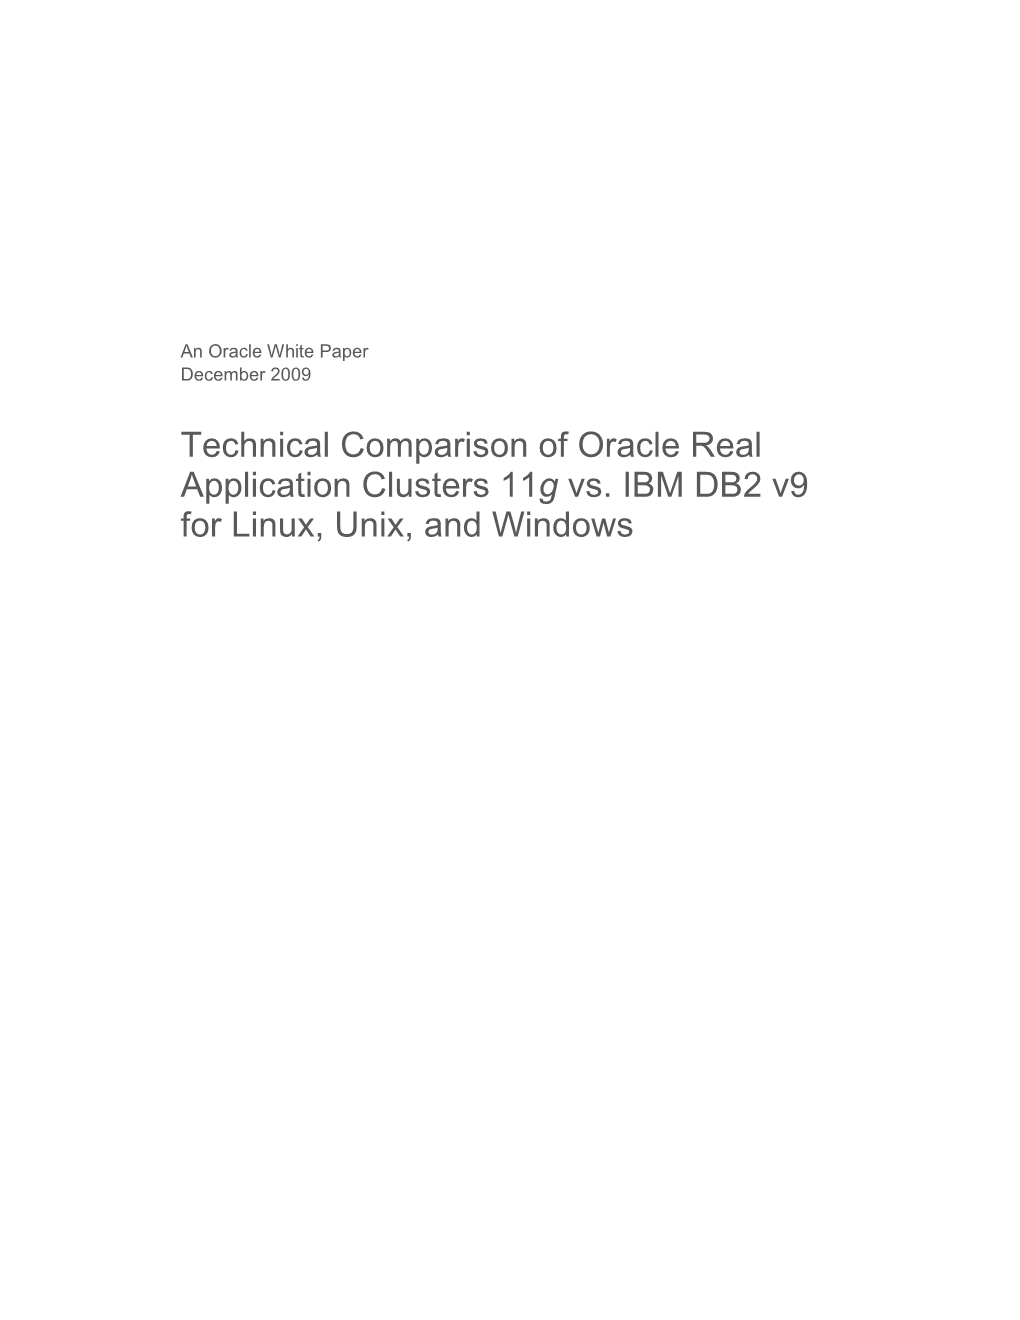 Technical Comparison of Oracle Real Application Clusters 11G Vs. IBM DB2 V9 for Linux, Unix, and Windows